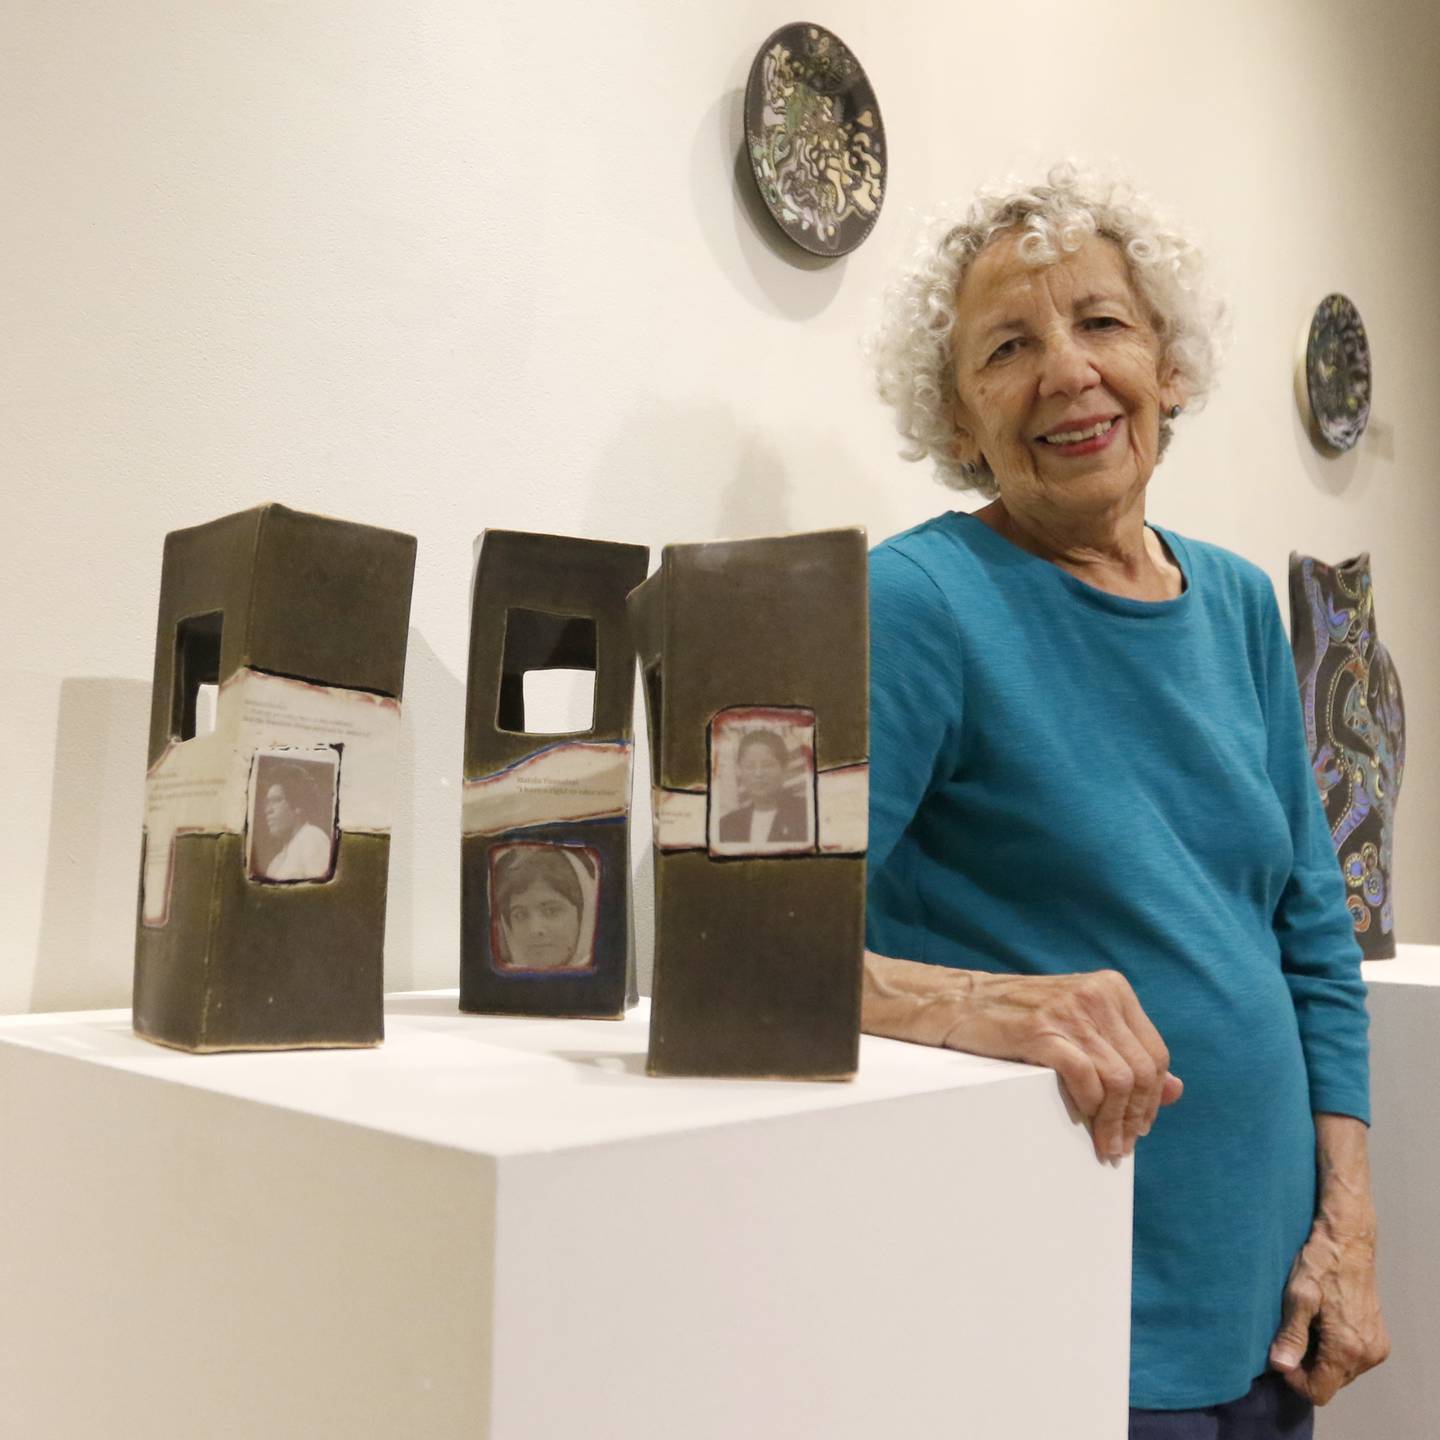 McHenry County College student Elaine Kadakia, 83, with some of her ceramic activist art on display Thursday, Sept. 8, 2022, at the college's gallery.